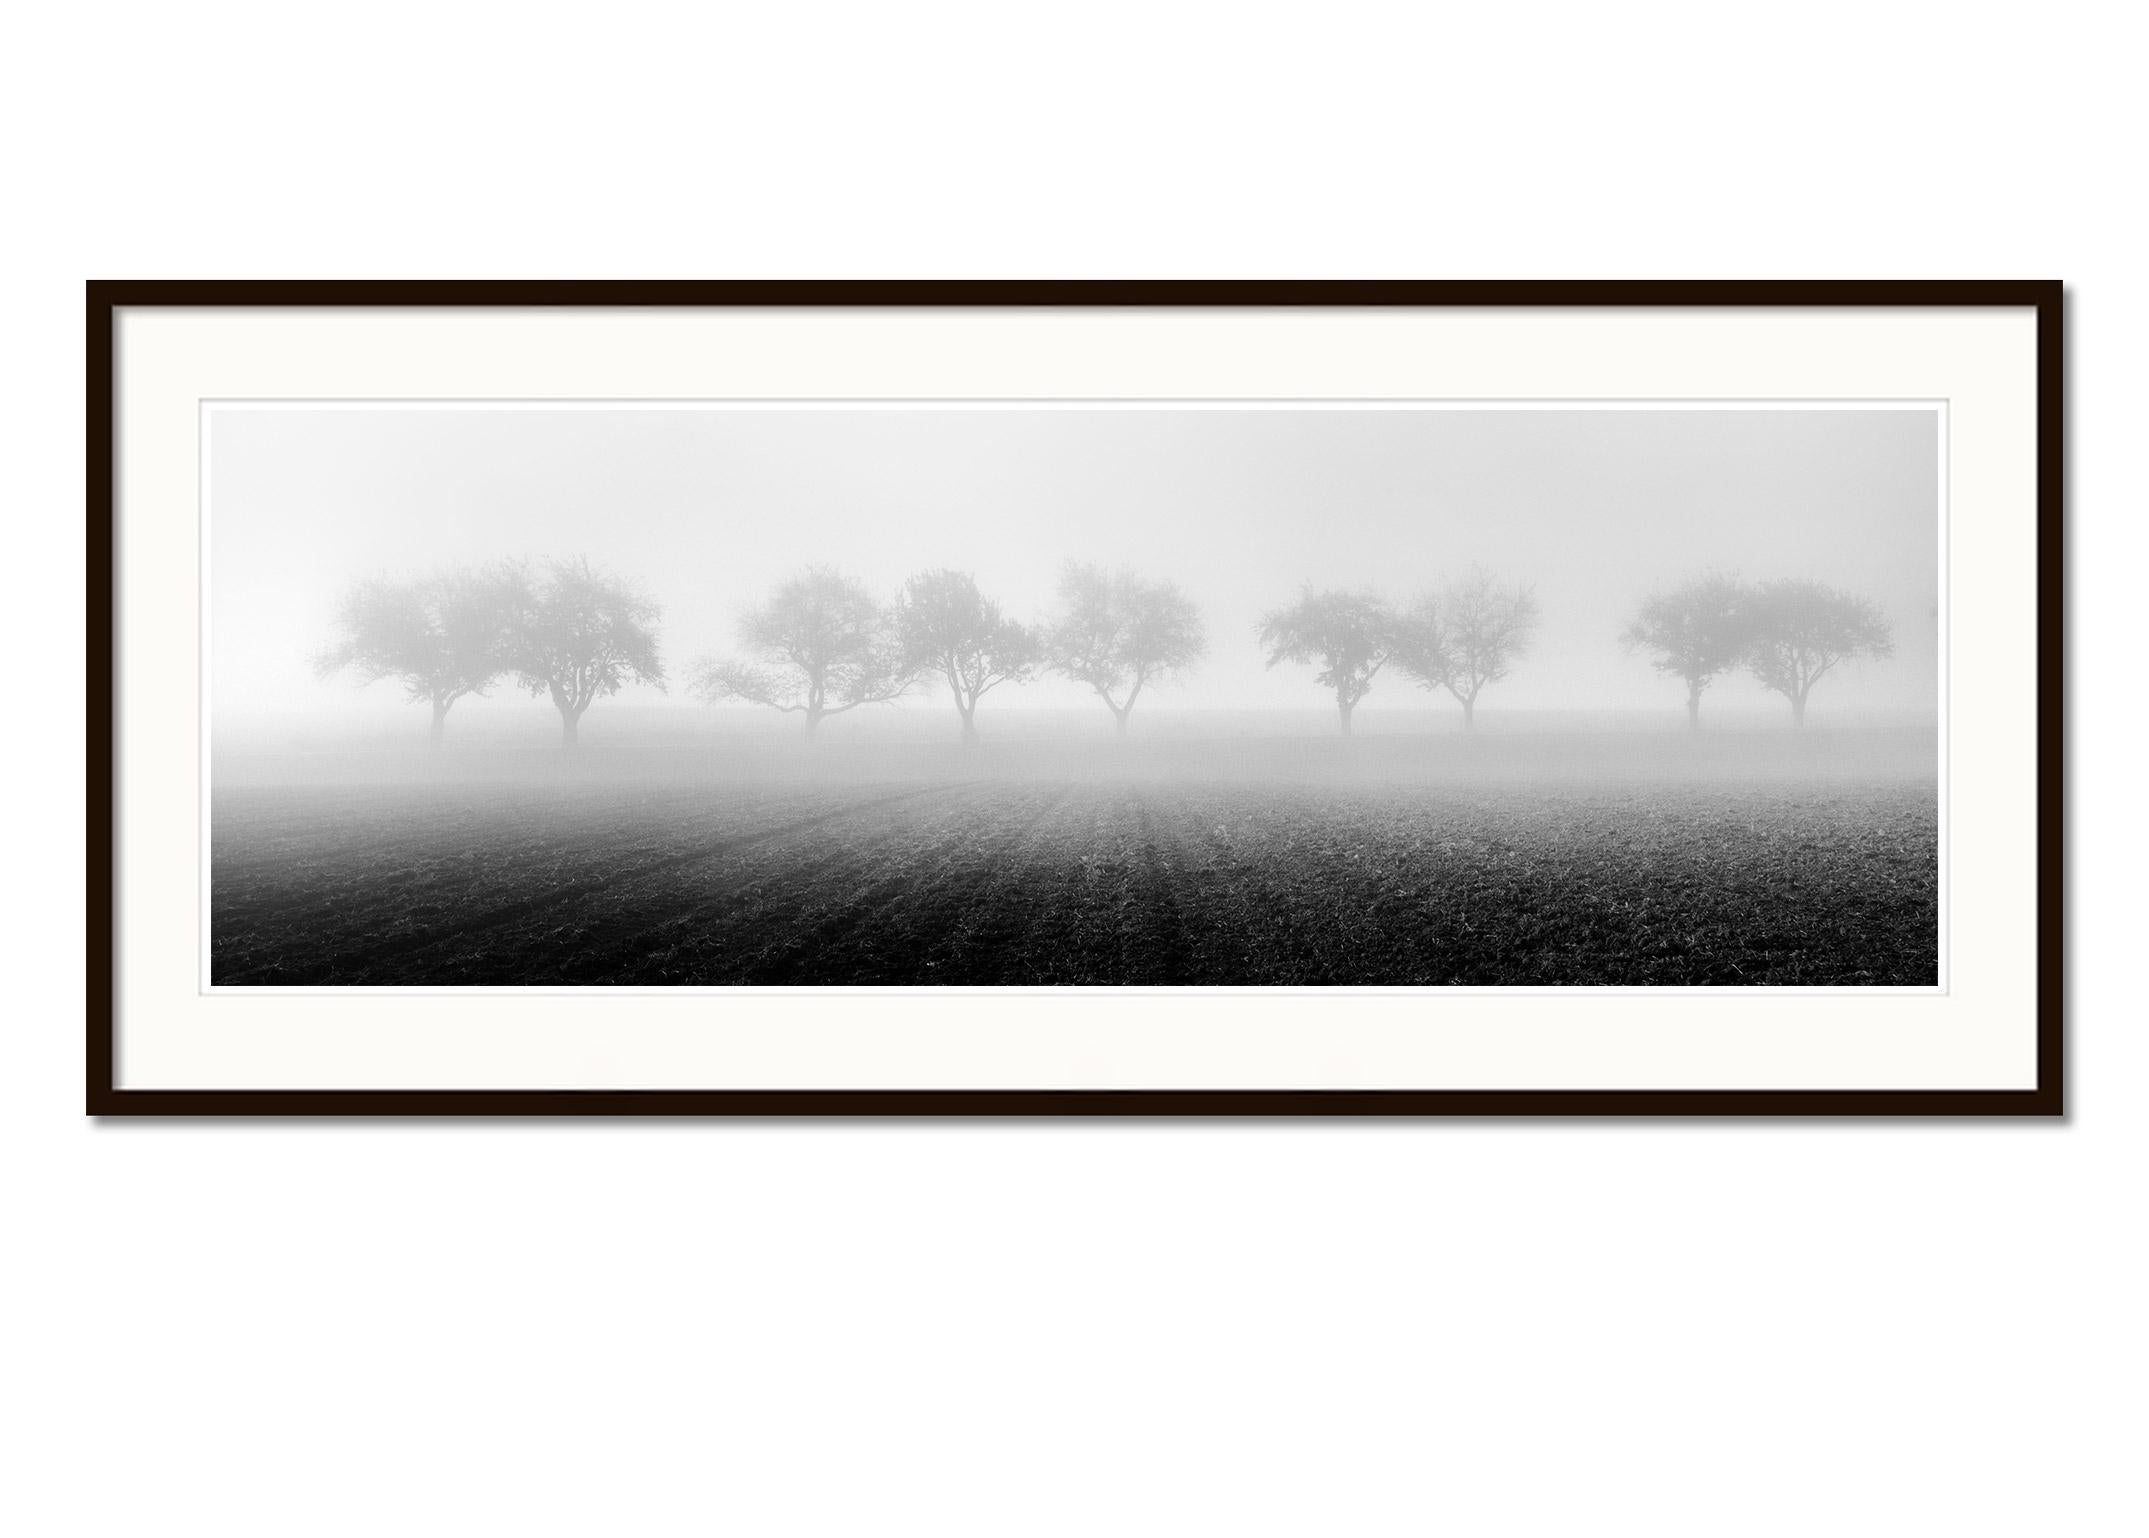 Foggy Morning, row of Cherry Trees, black and white photography, art landscape - Gray Landscape Photograph by Gerald Berghammer